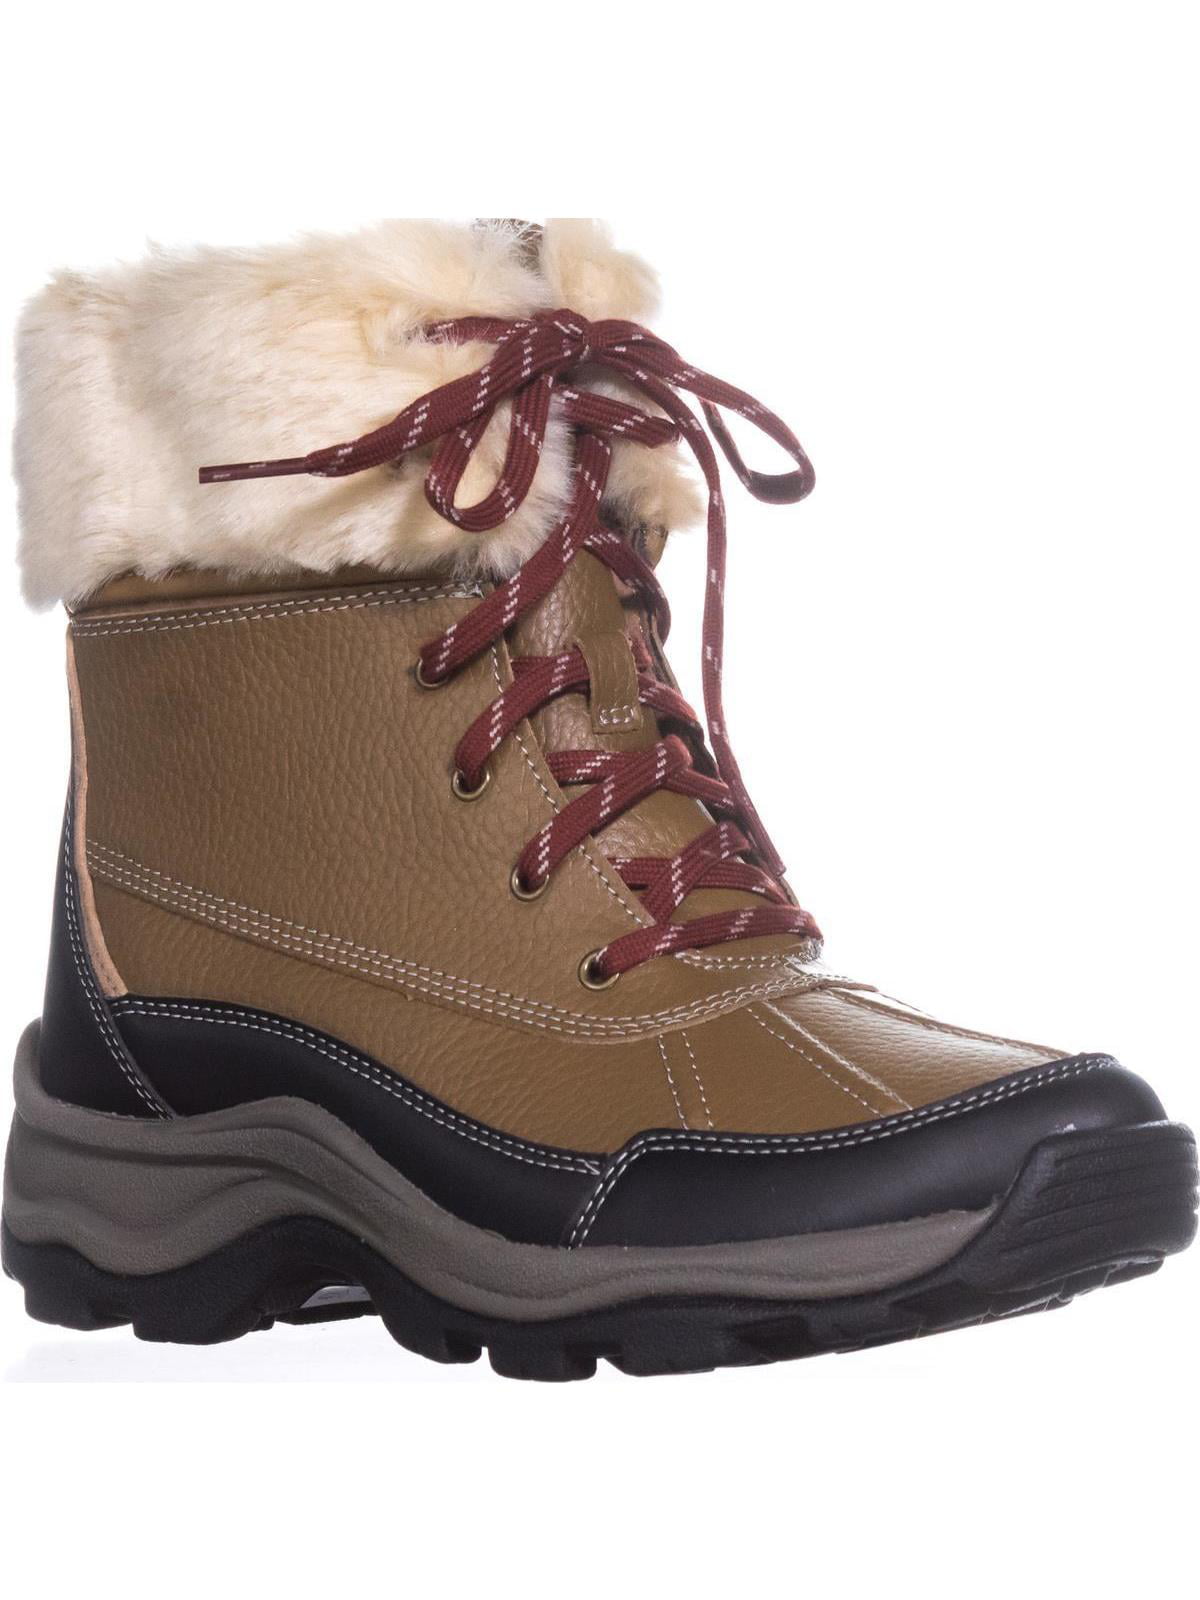 clarks walking boots for womens